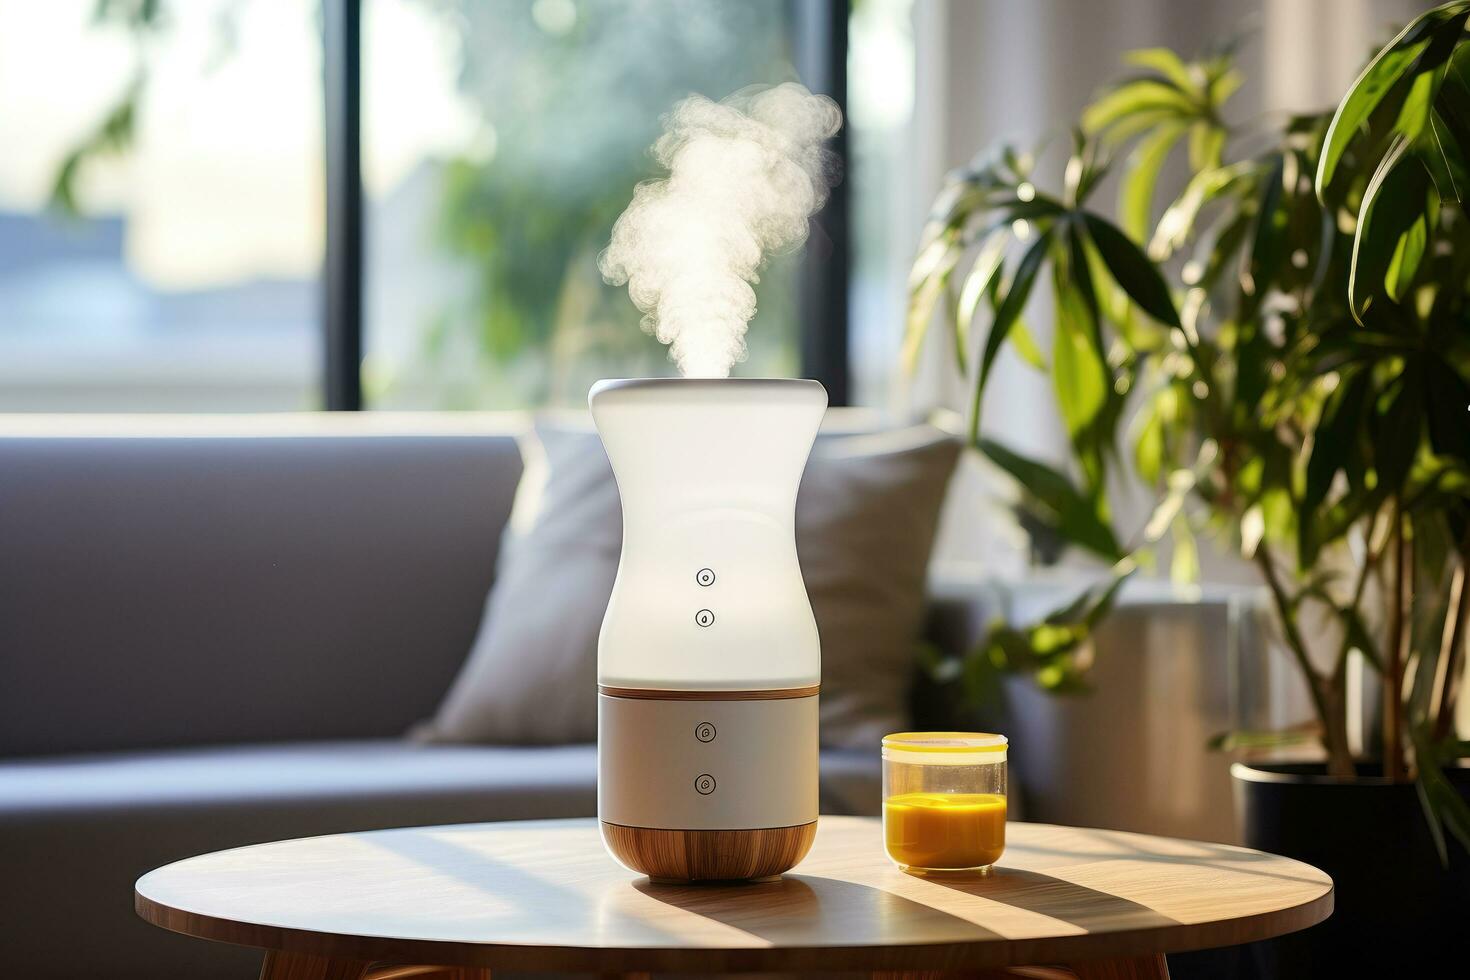 AI generated a white humidifier for the living room photo